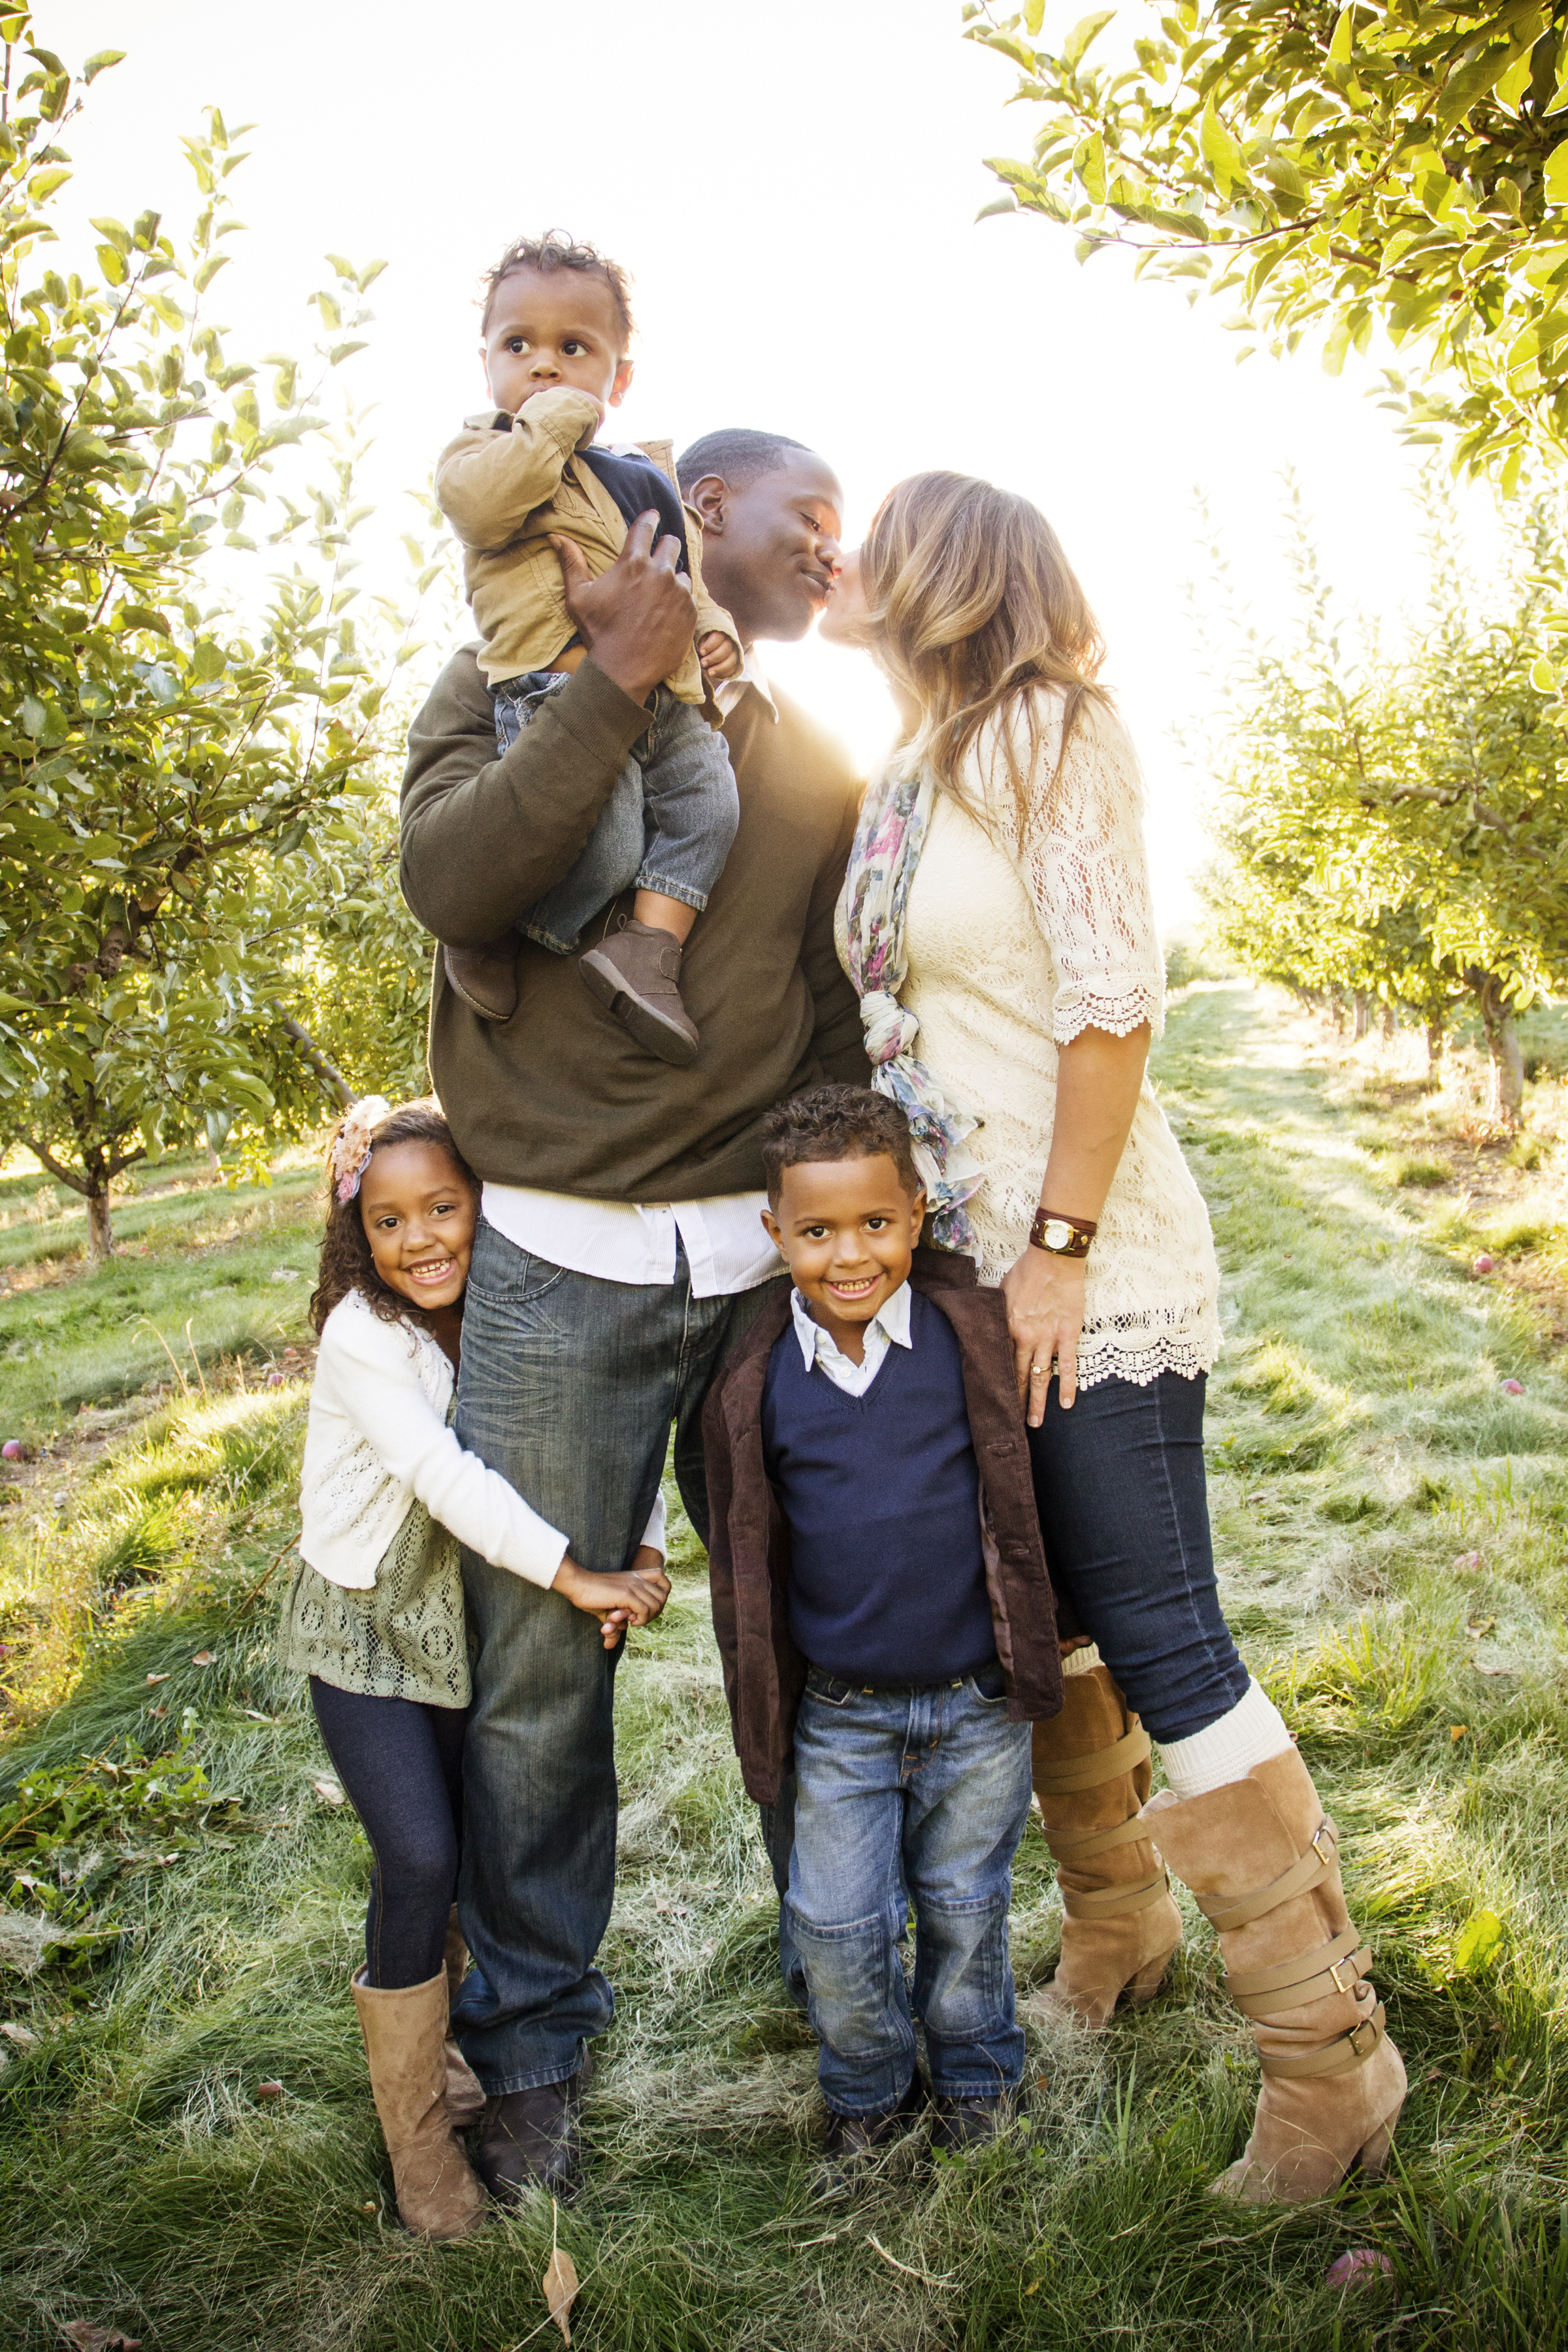 A multi-ethnic family is pictured having a wonderful time outdoors | Source: Shutterstock